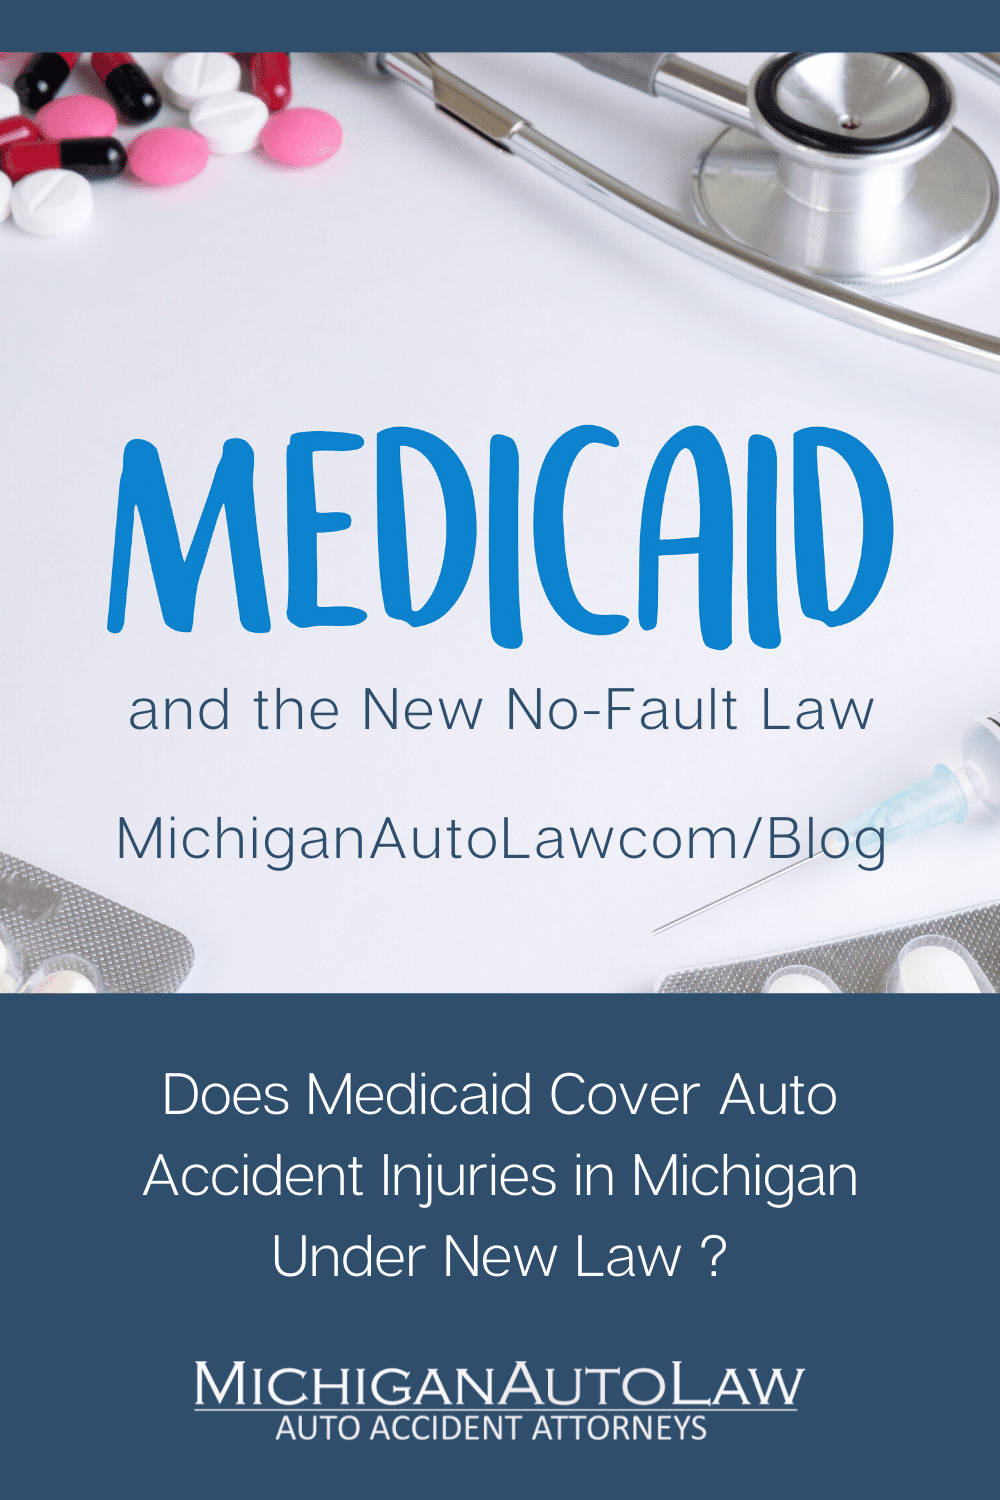 Does Medicaid Cover Auto Accident Injuries in Michigan Under New Law?